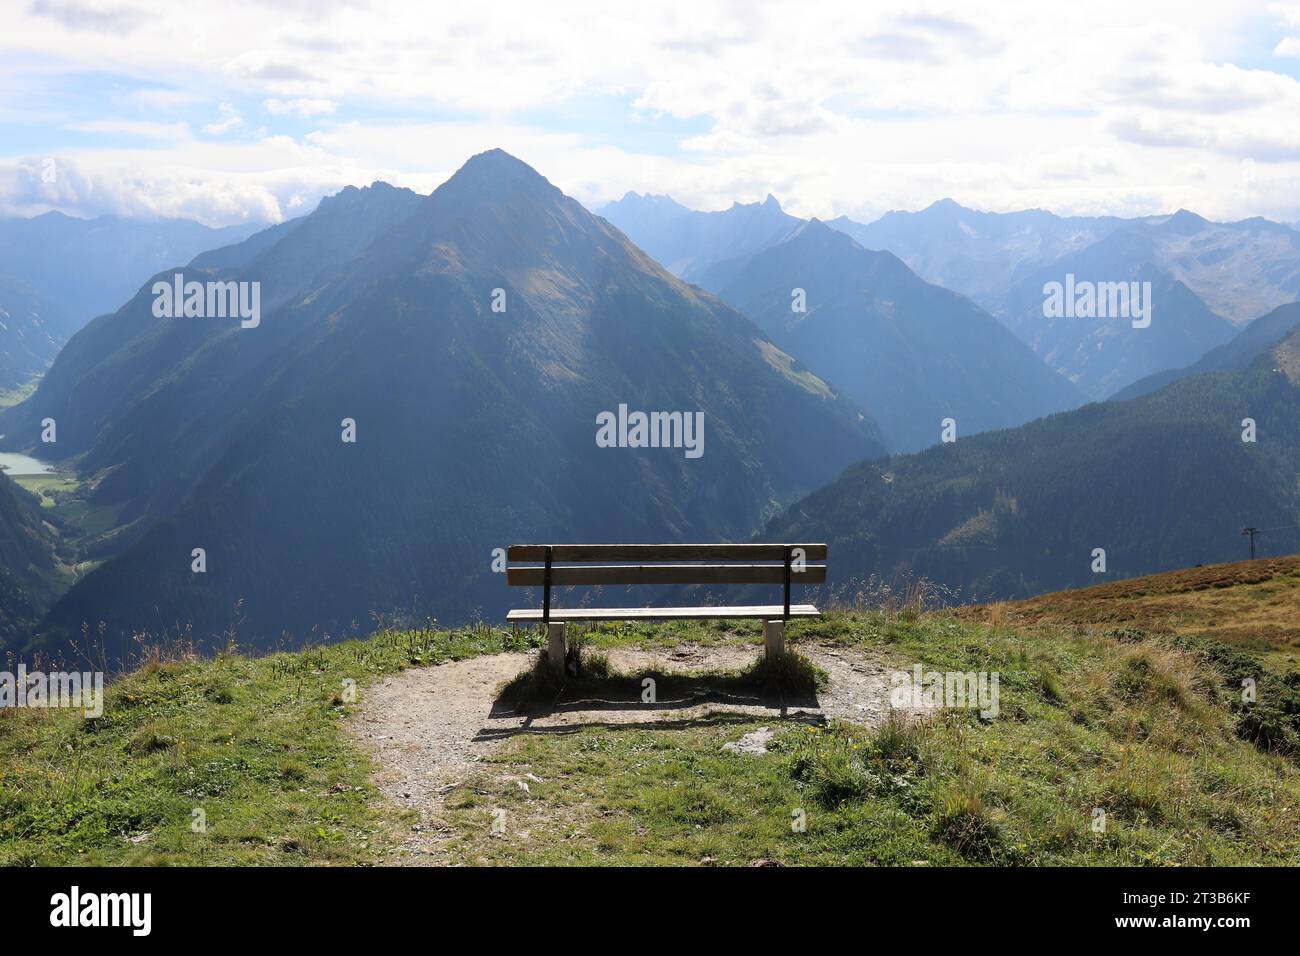 View of a wooden bench on a mountain plateau in front of a magnificent mountain backdrop Stock Photo